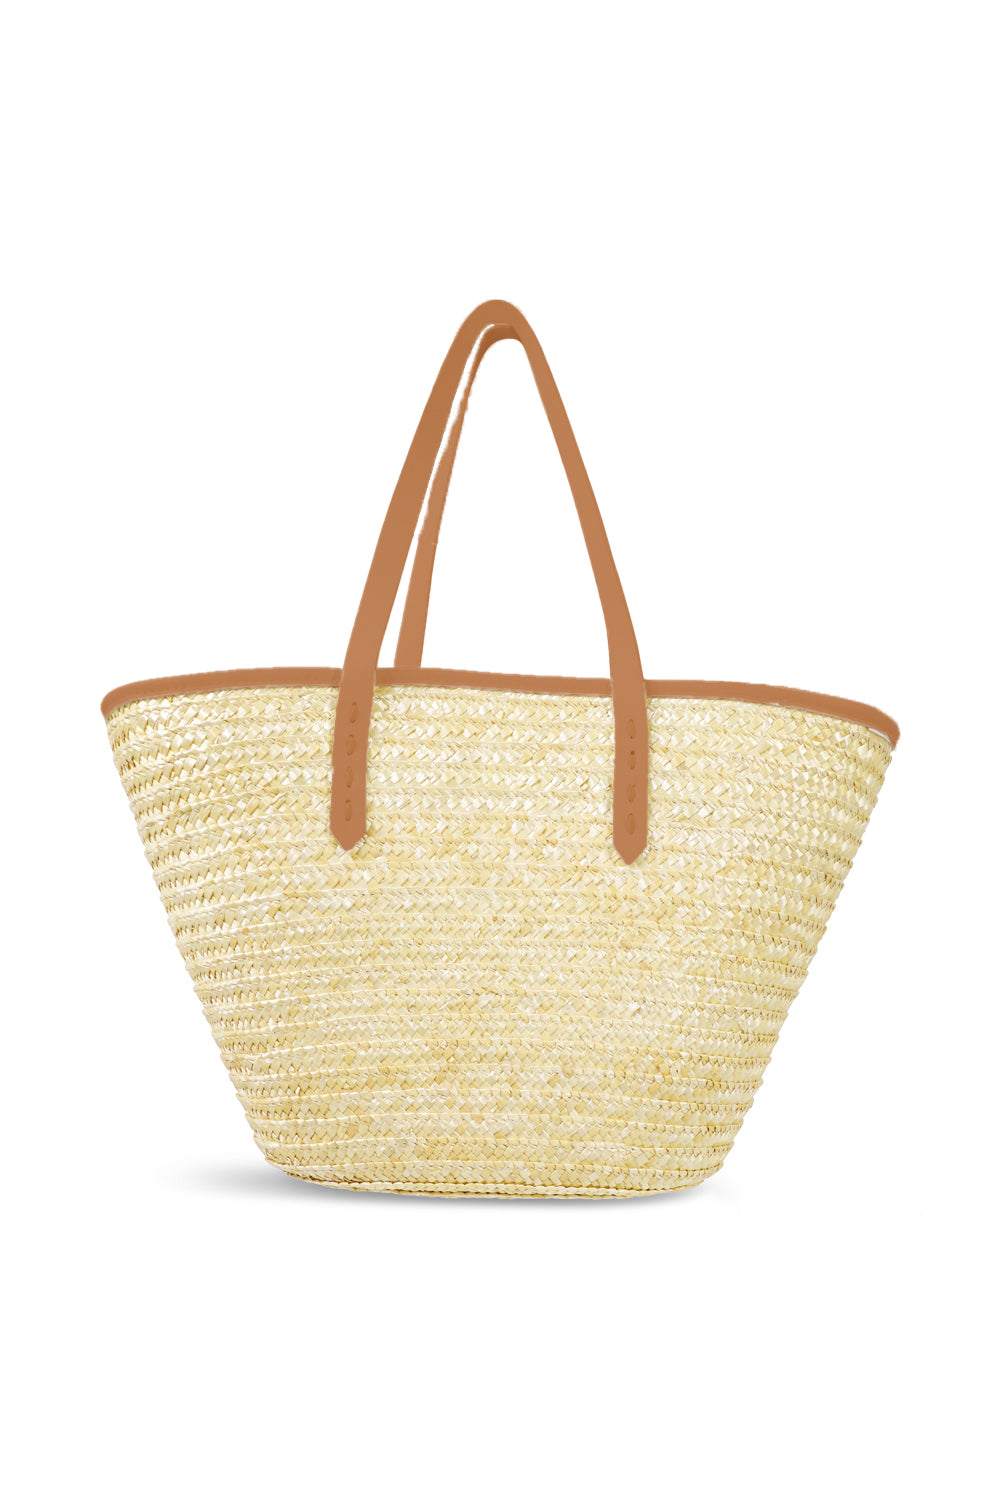 Structured Straw Tote Beach Basket Bag in Natural and Beige | Summer bag | beach bag | Holiday Bag | Coastal Core | straw bag | city break bag | coast grandmother bag | Vacation bag | spring | summer | Women's accessories | Womens bags 